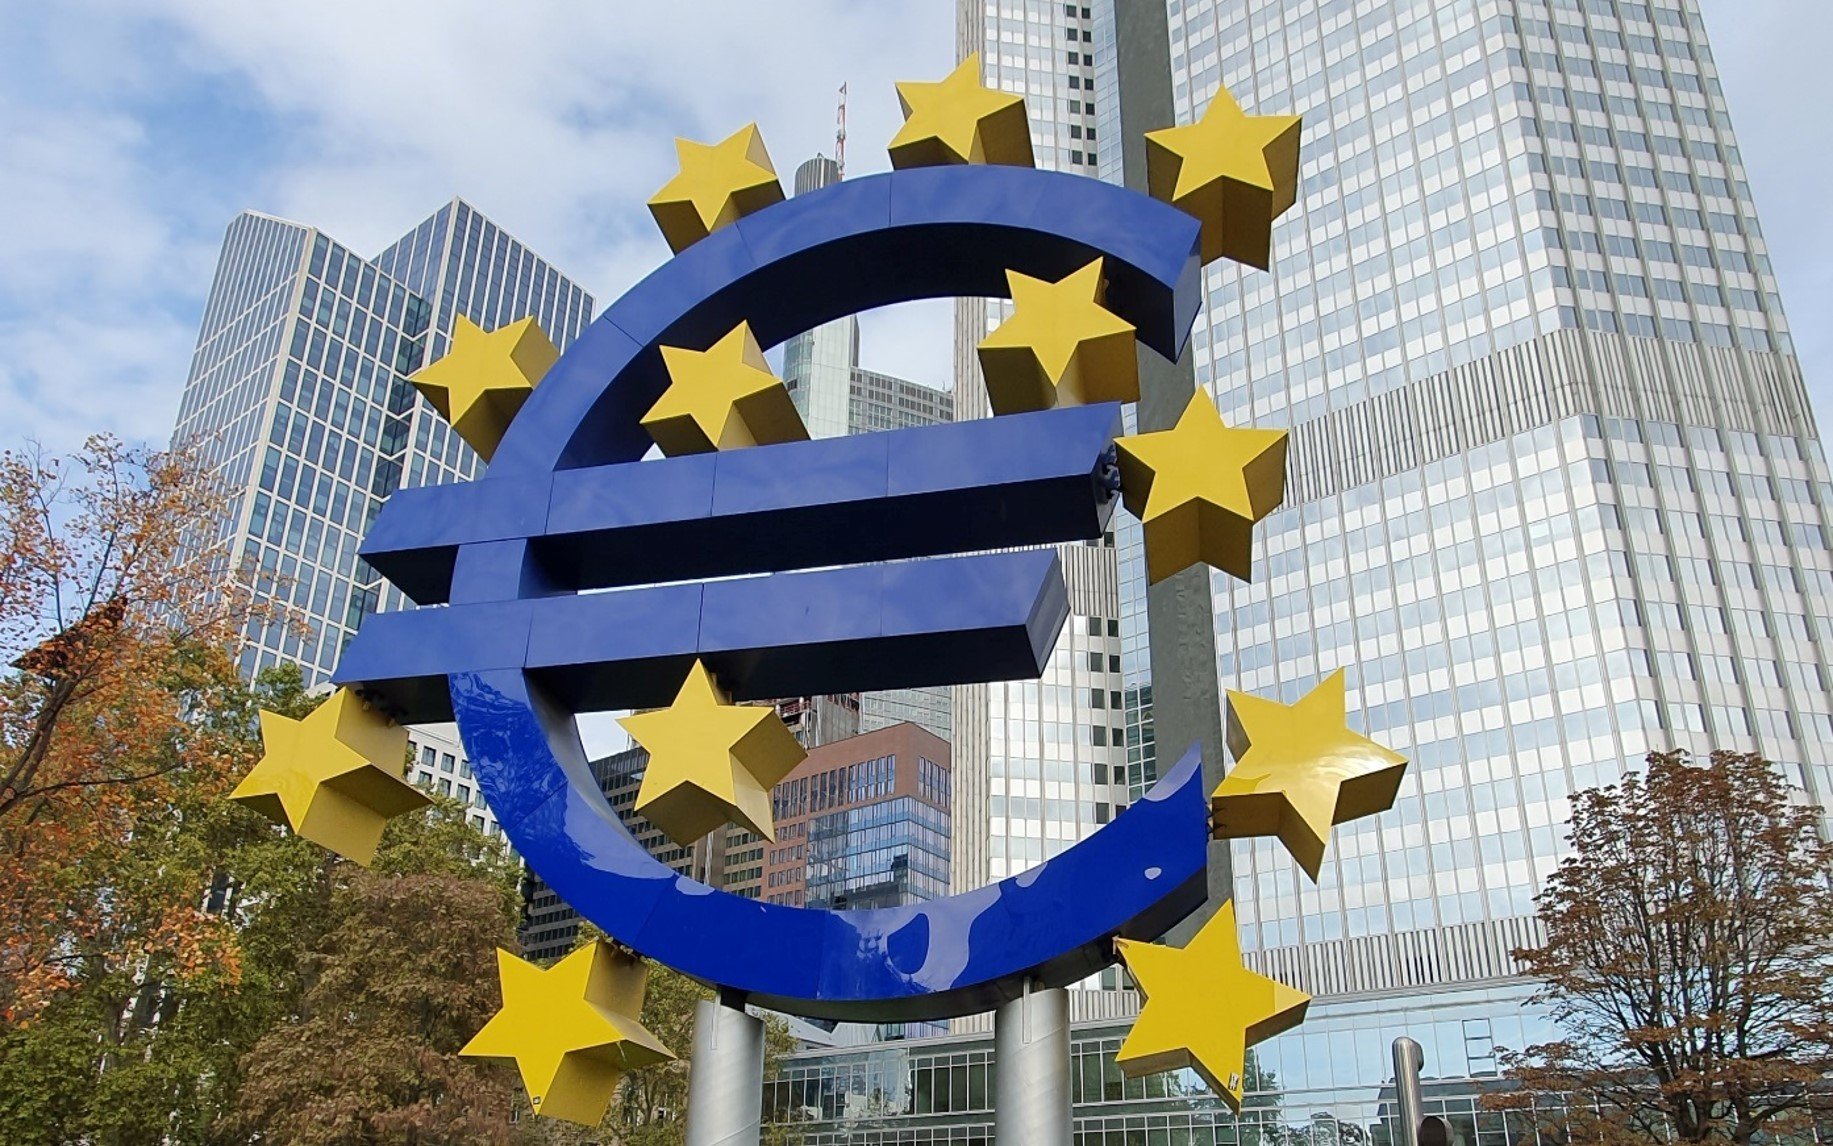 The image shows a sculpture with the shape of the Euro currency symbol in front of the European Central Bank headquarters in Frankfurt, Germany.